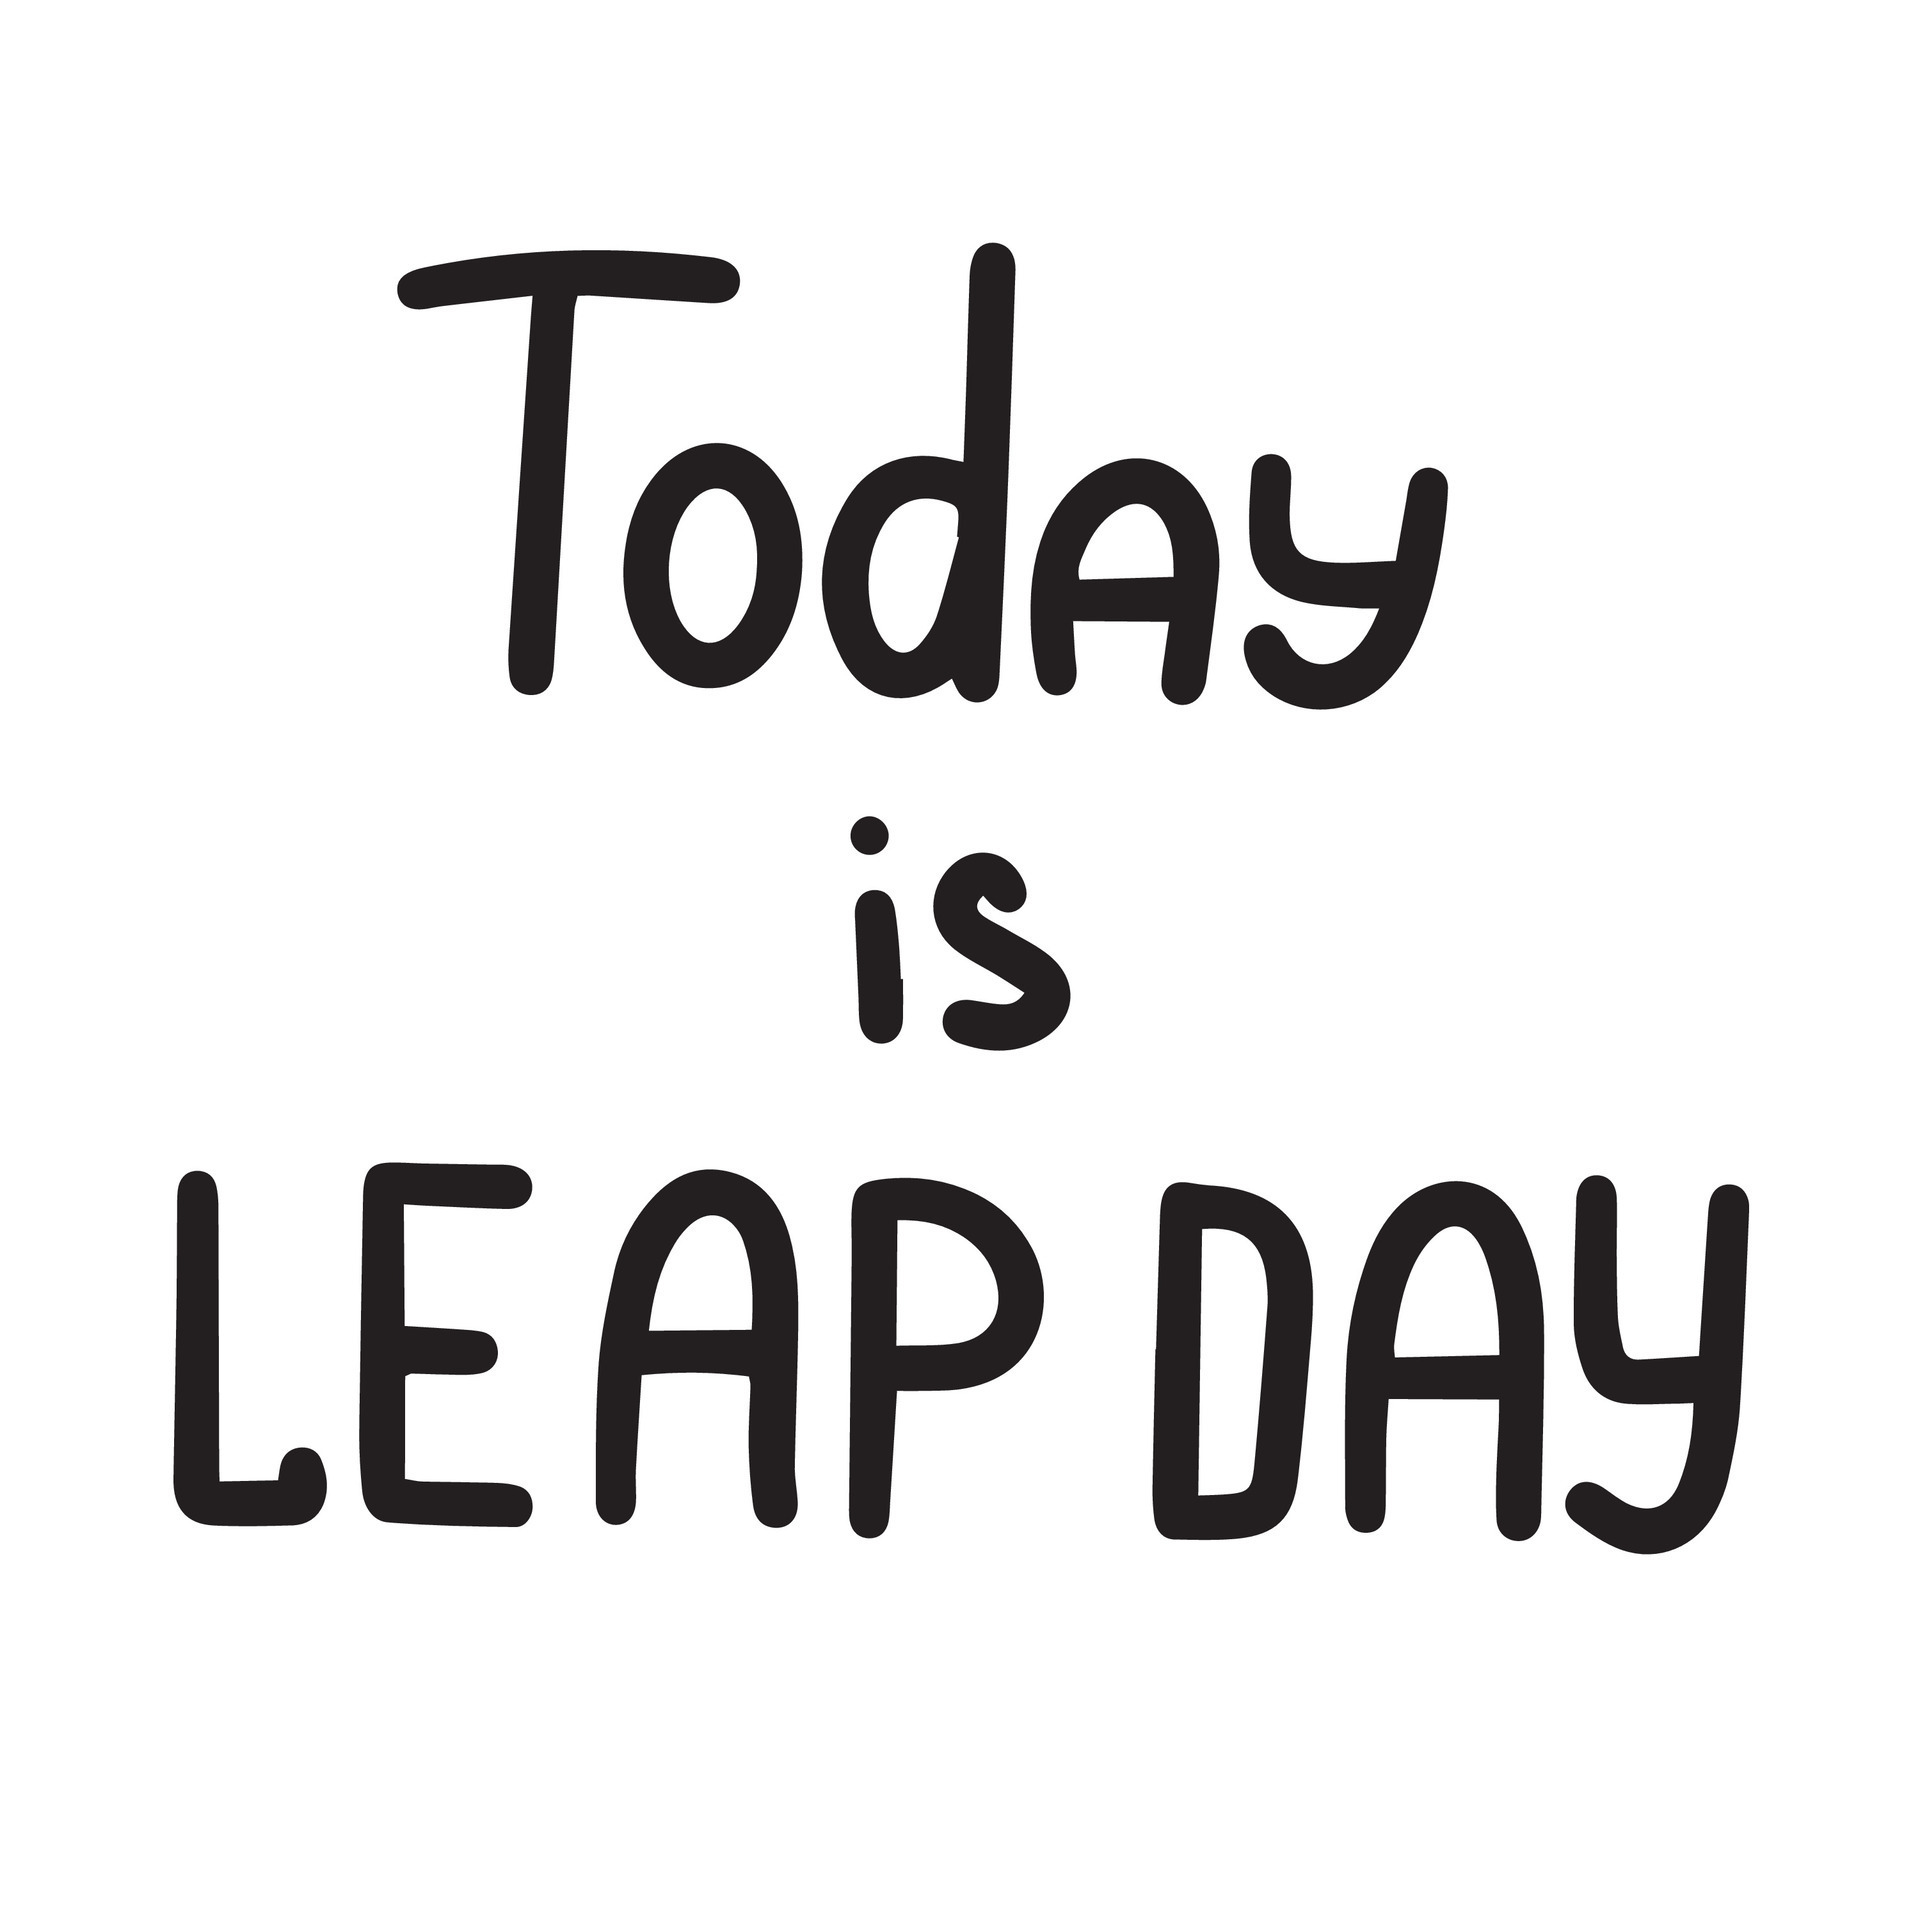 happy-leap-day-or-leap-year-slogan-calendar-page-29-february-month